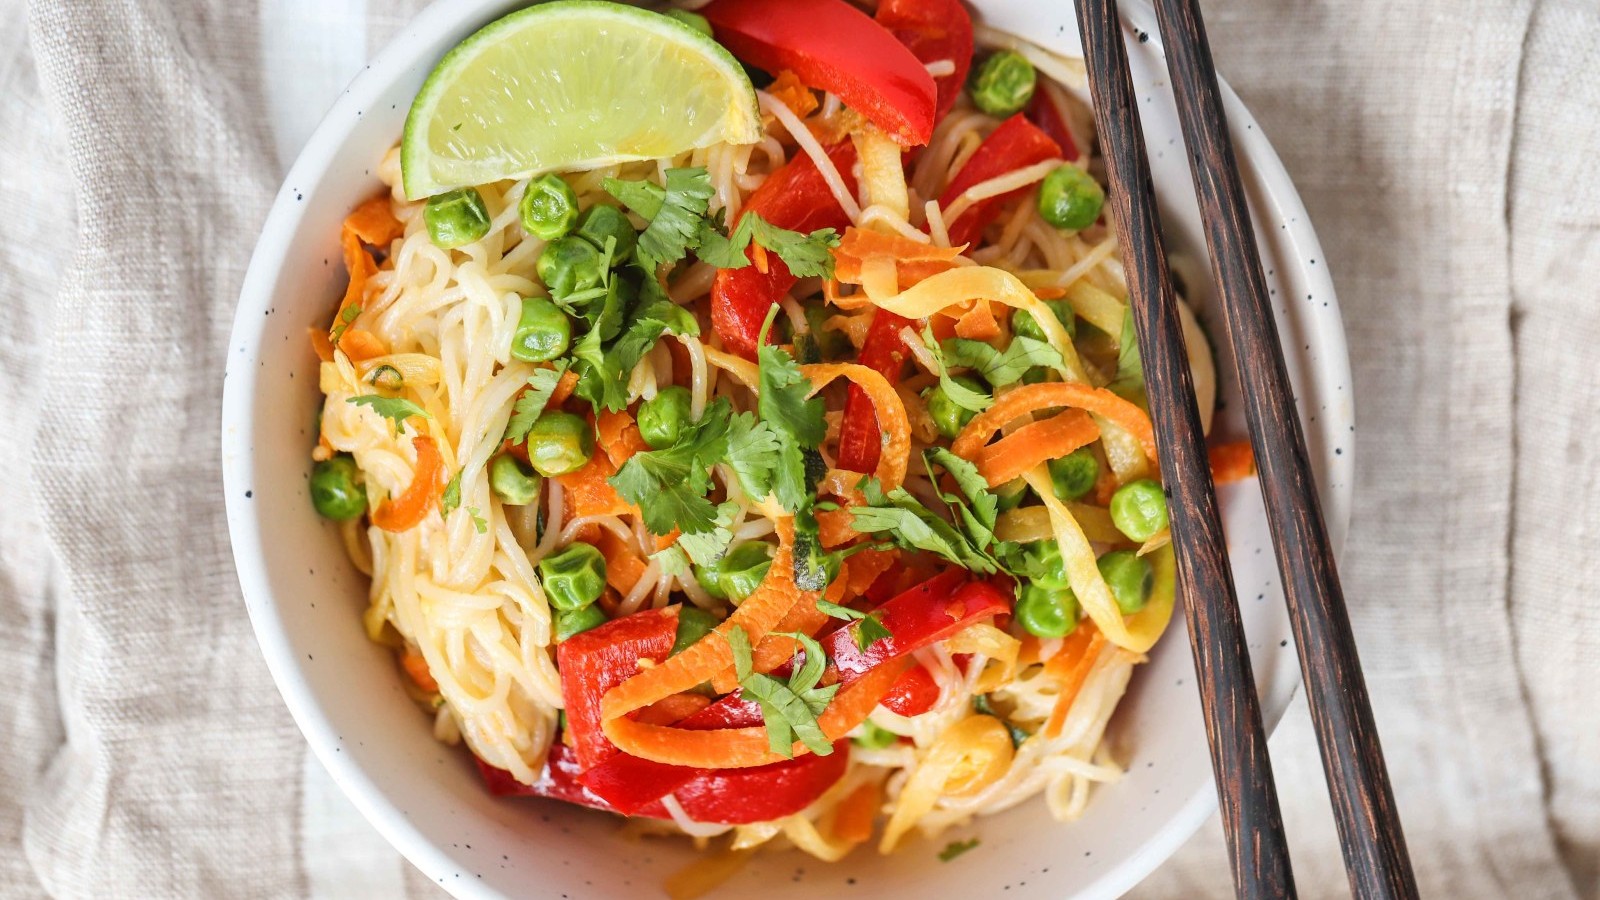 Image of Quick Vegetable Stir Fry